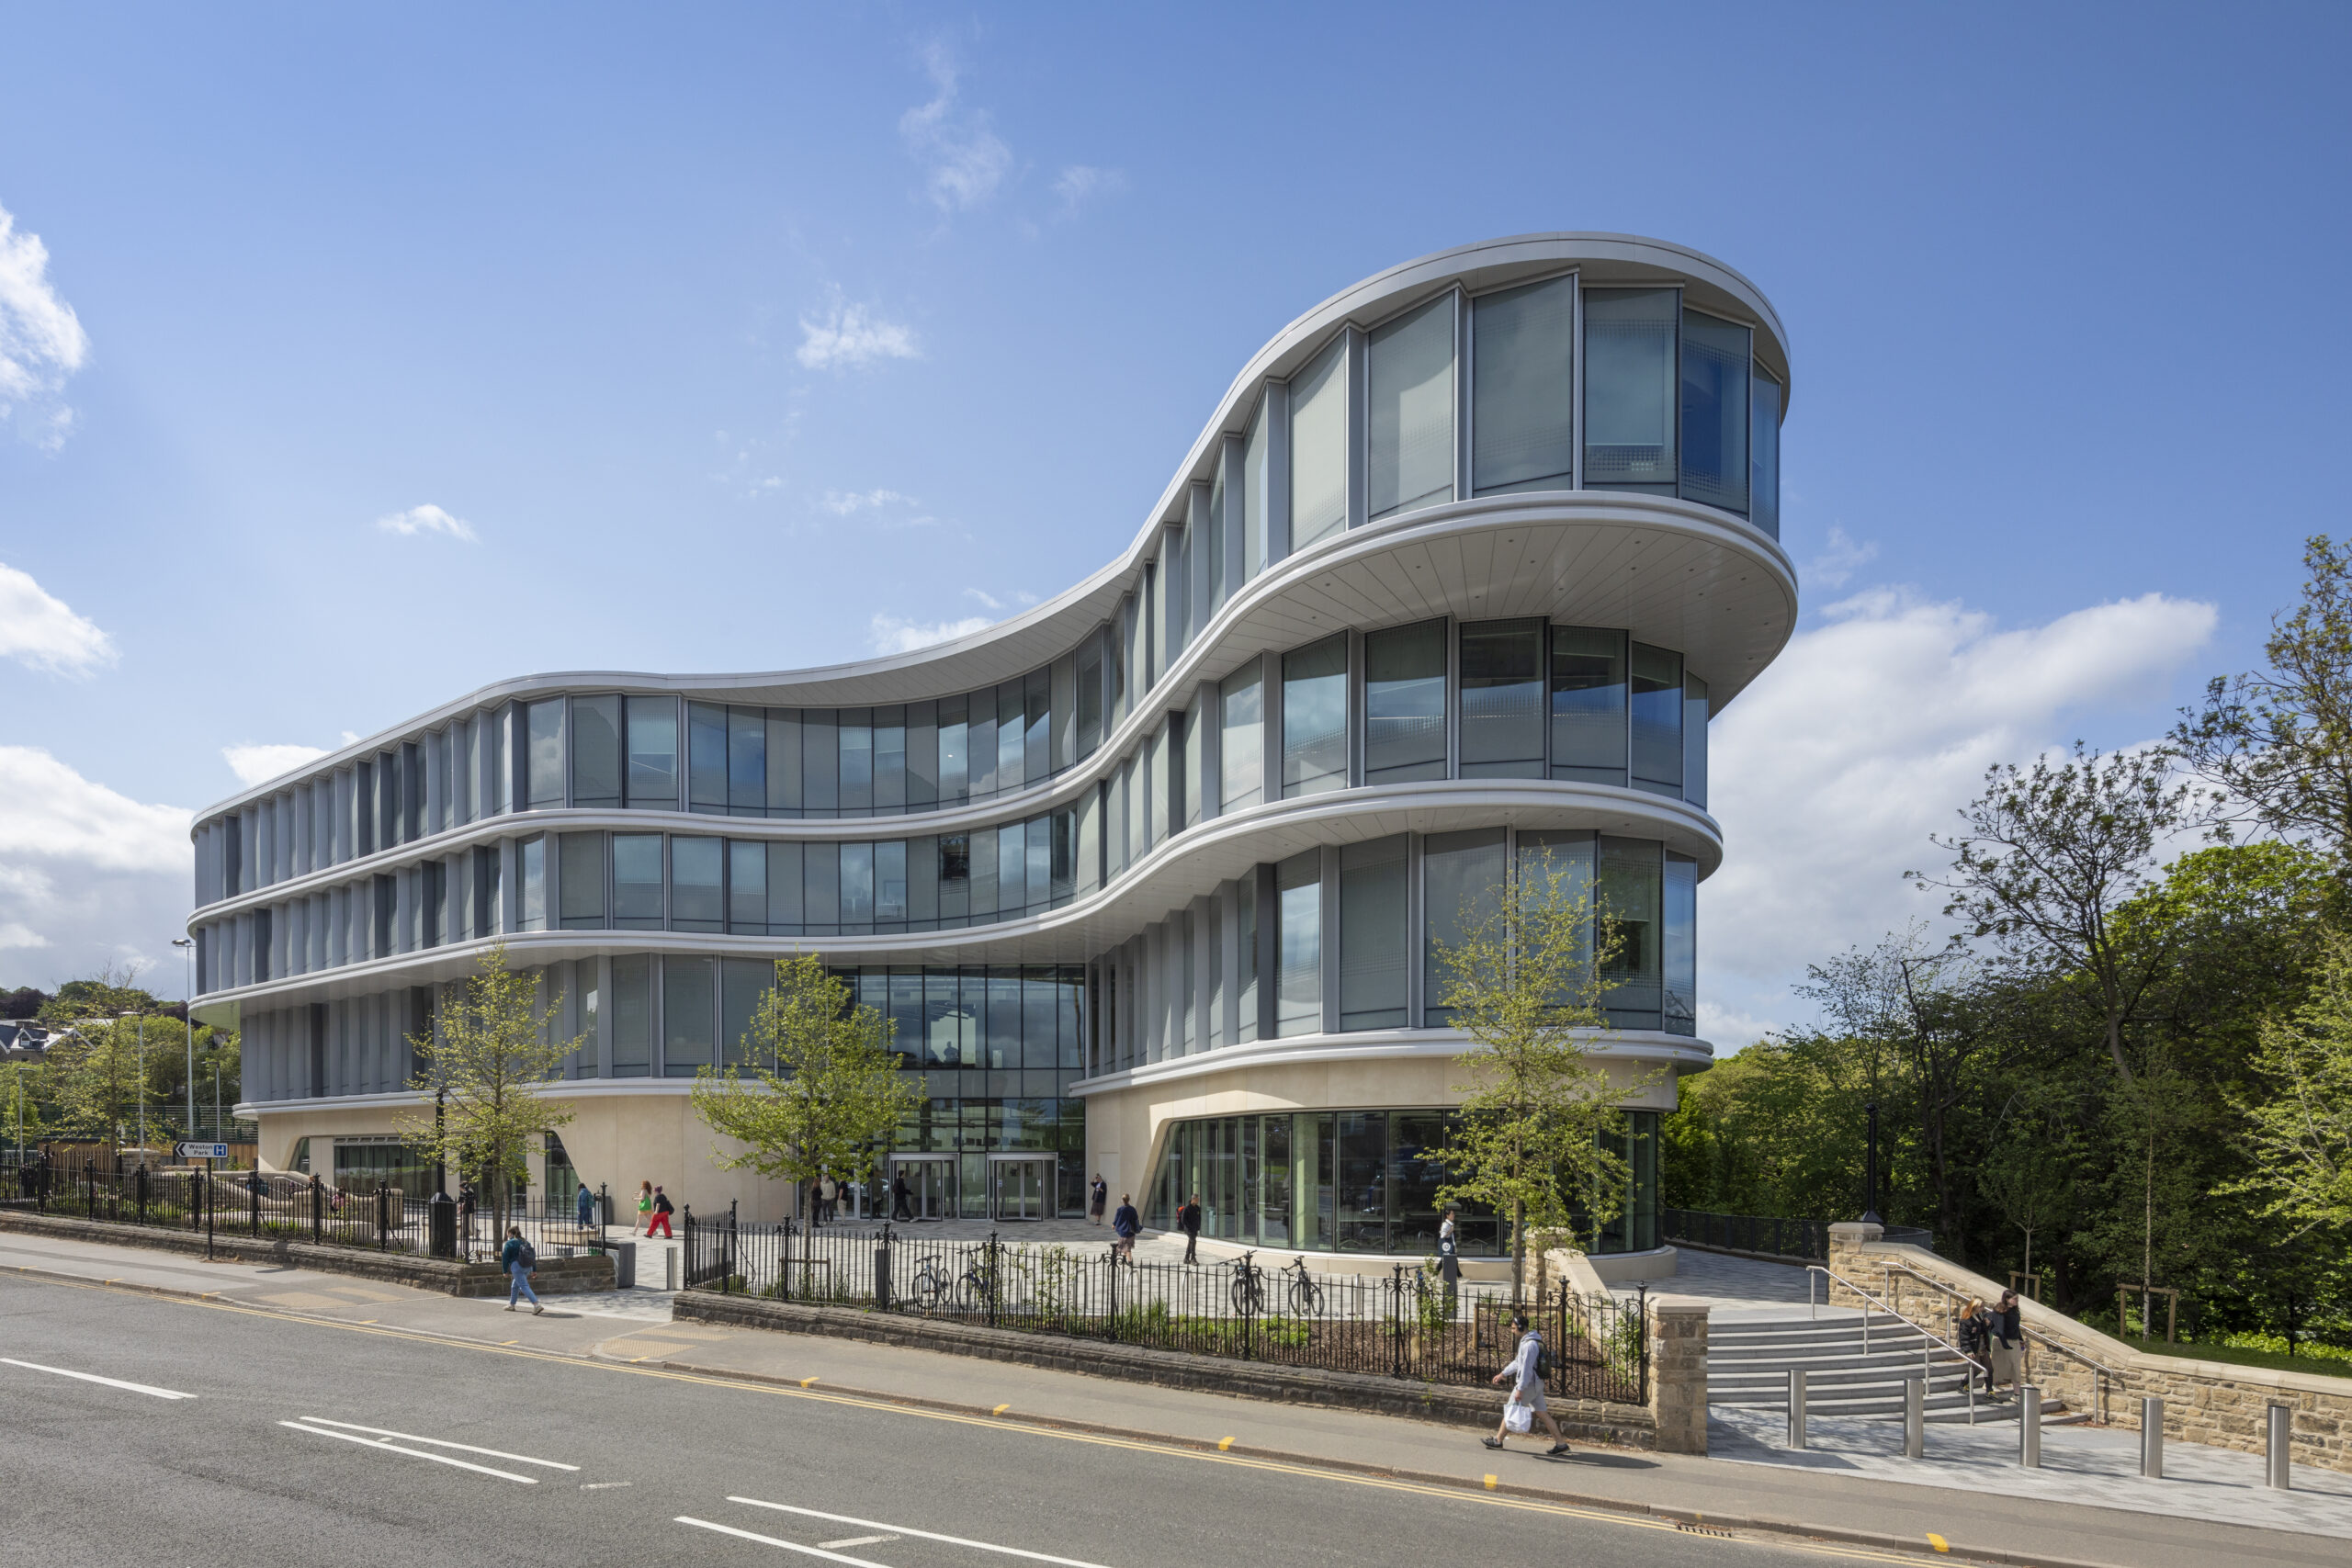 The Wave for The University of Sheffield is home to the Faculty of Social Sciences. Designed by HLM Architects, the £55 Million BREEAM Outstanding building opened in spring 2023.